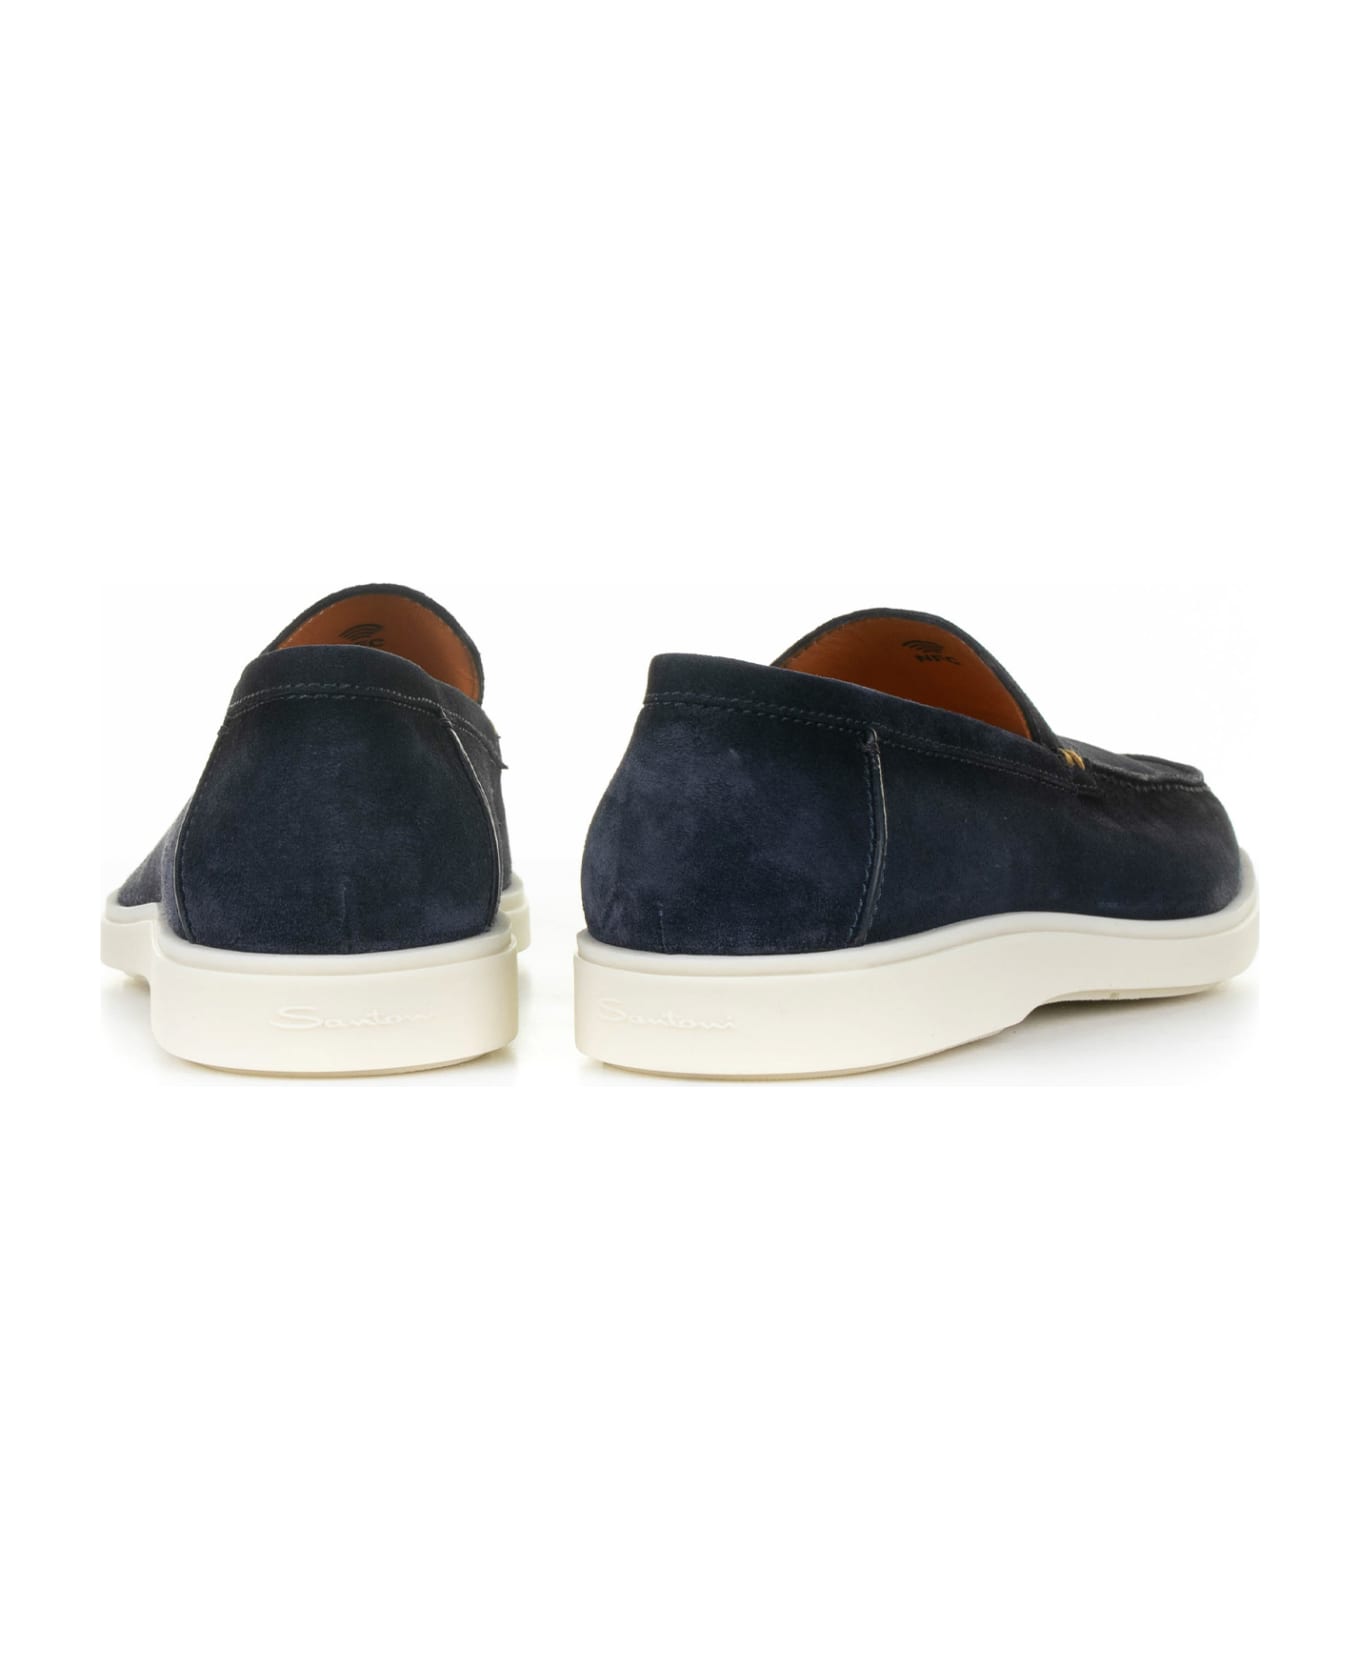 Santoni Moccasin In Blue Suede And Rubber Sole - BLUE ローファー＆デッキシューズ